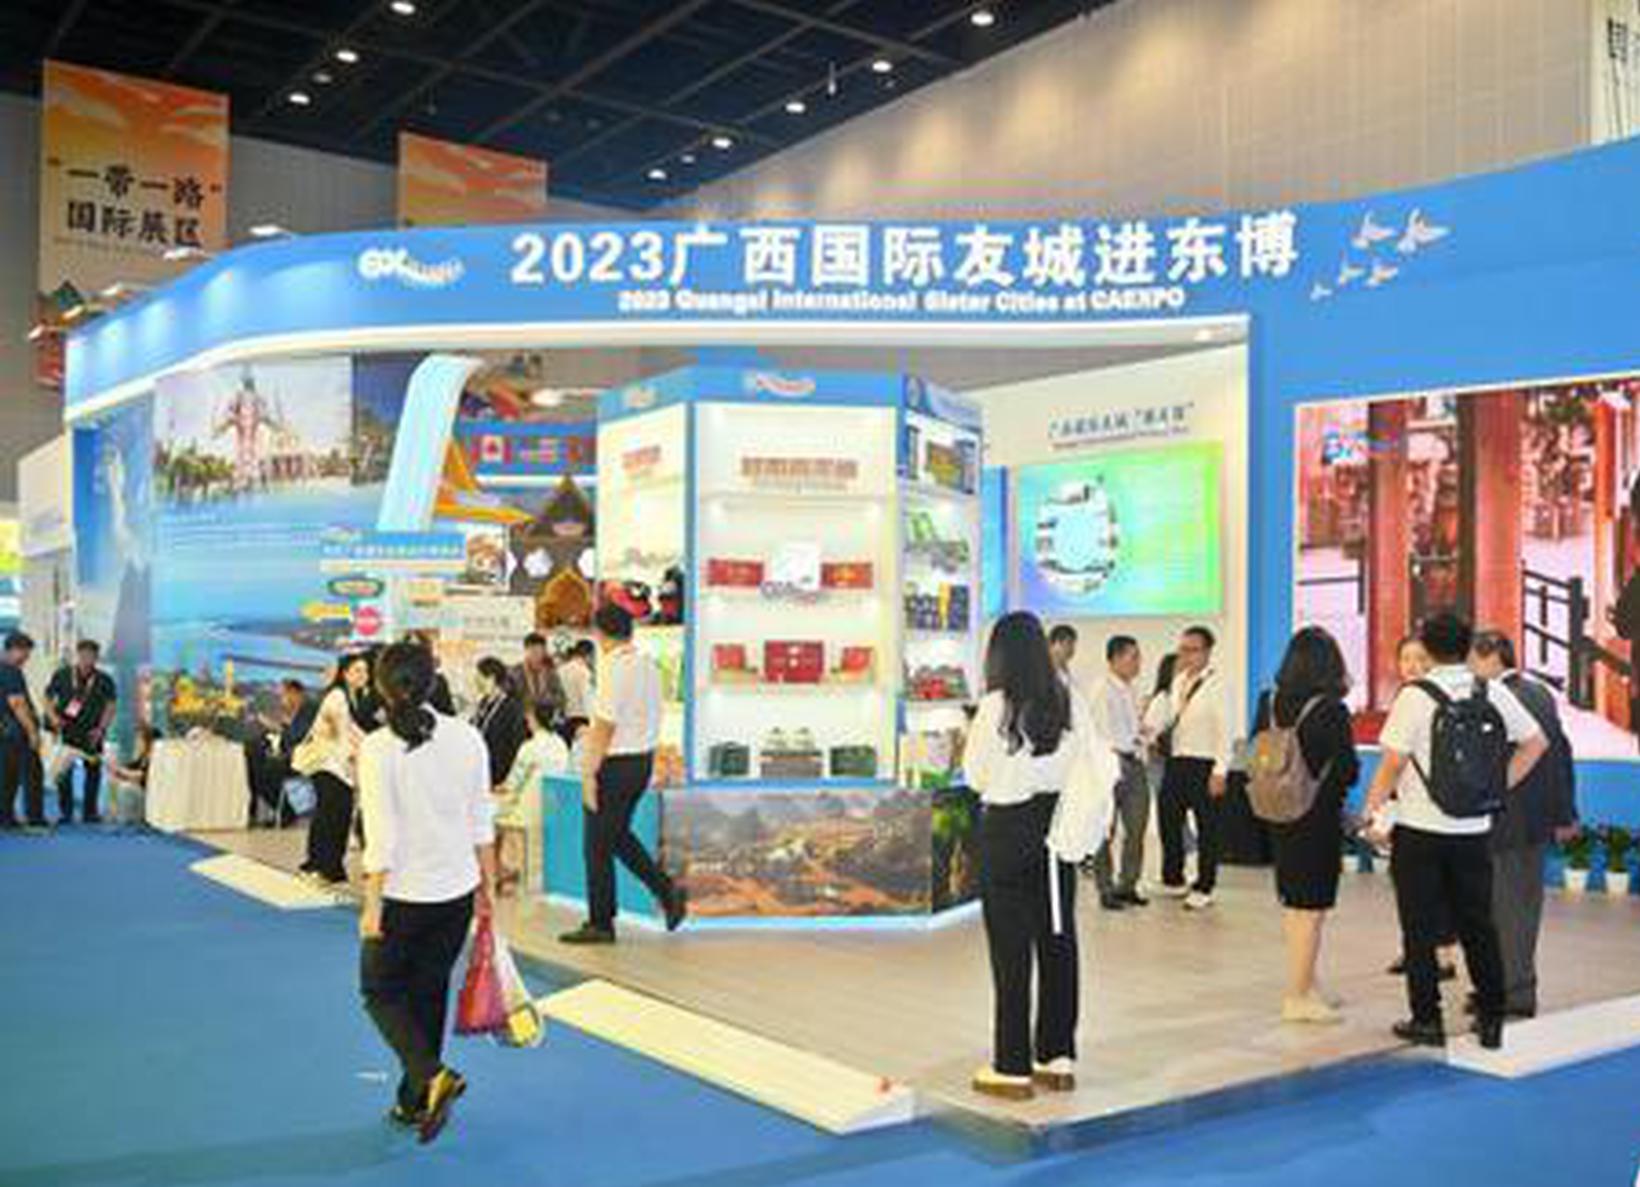 2023 Guangxi International Sister Cities at CAEXPO: an international exhibition